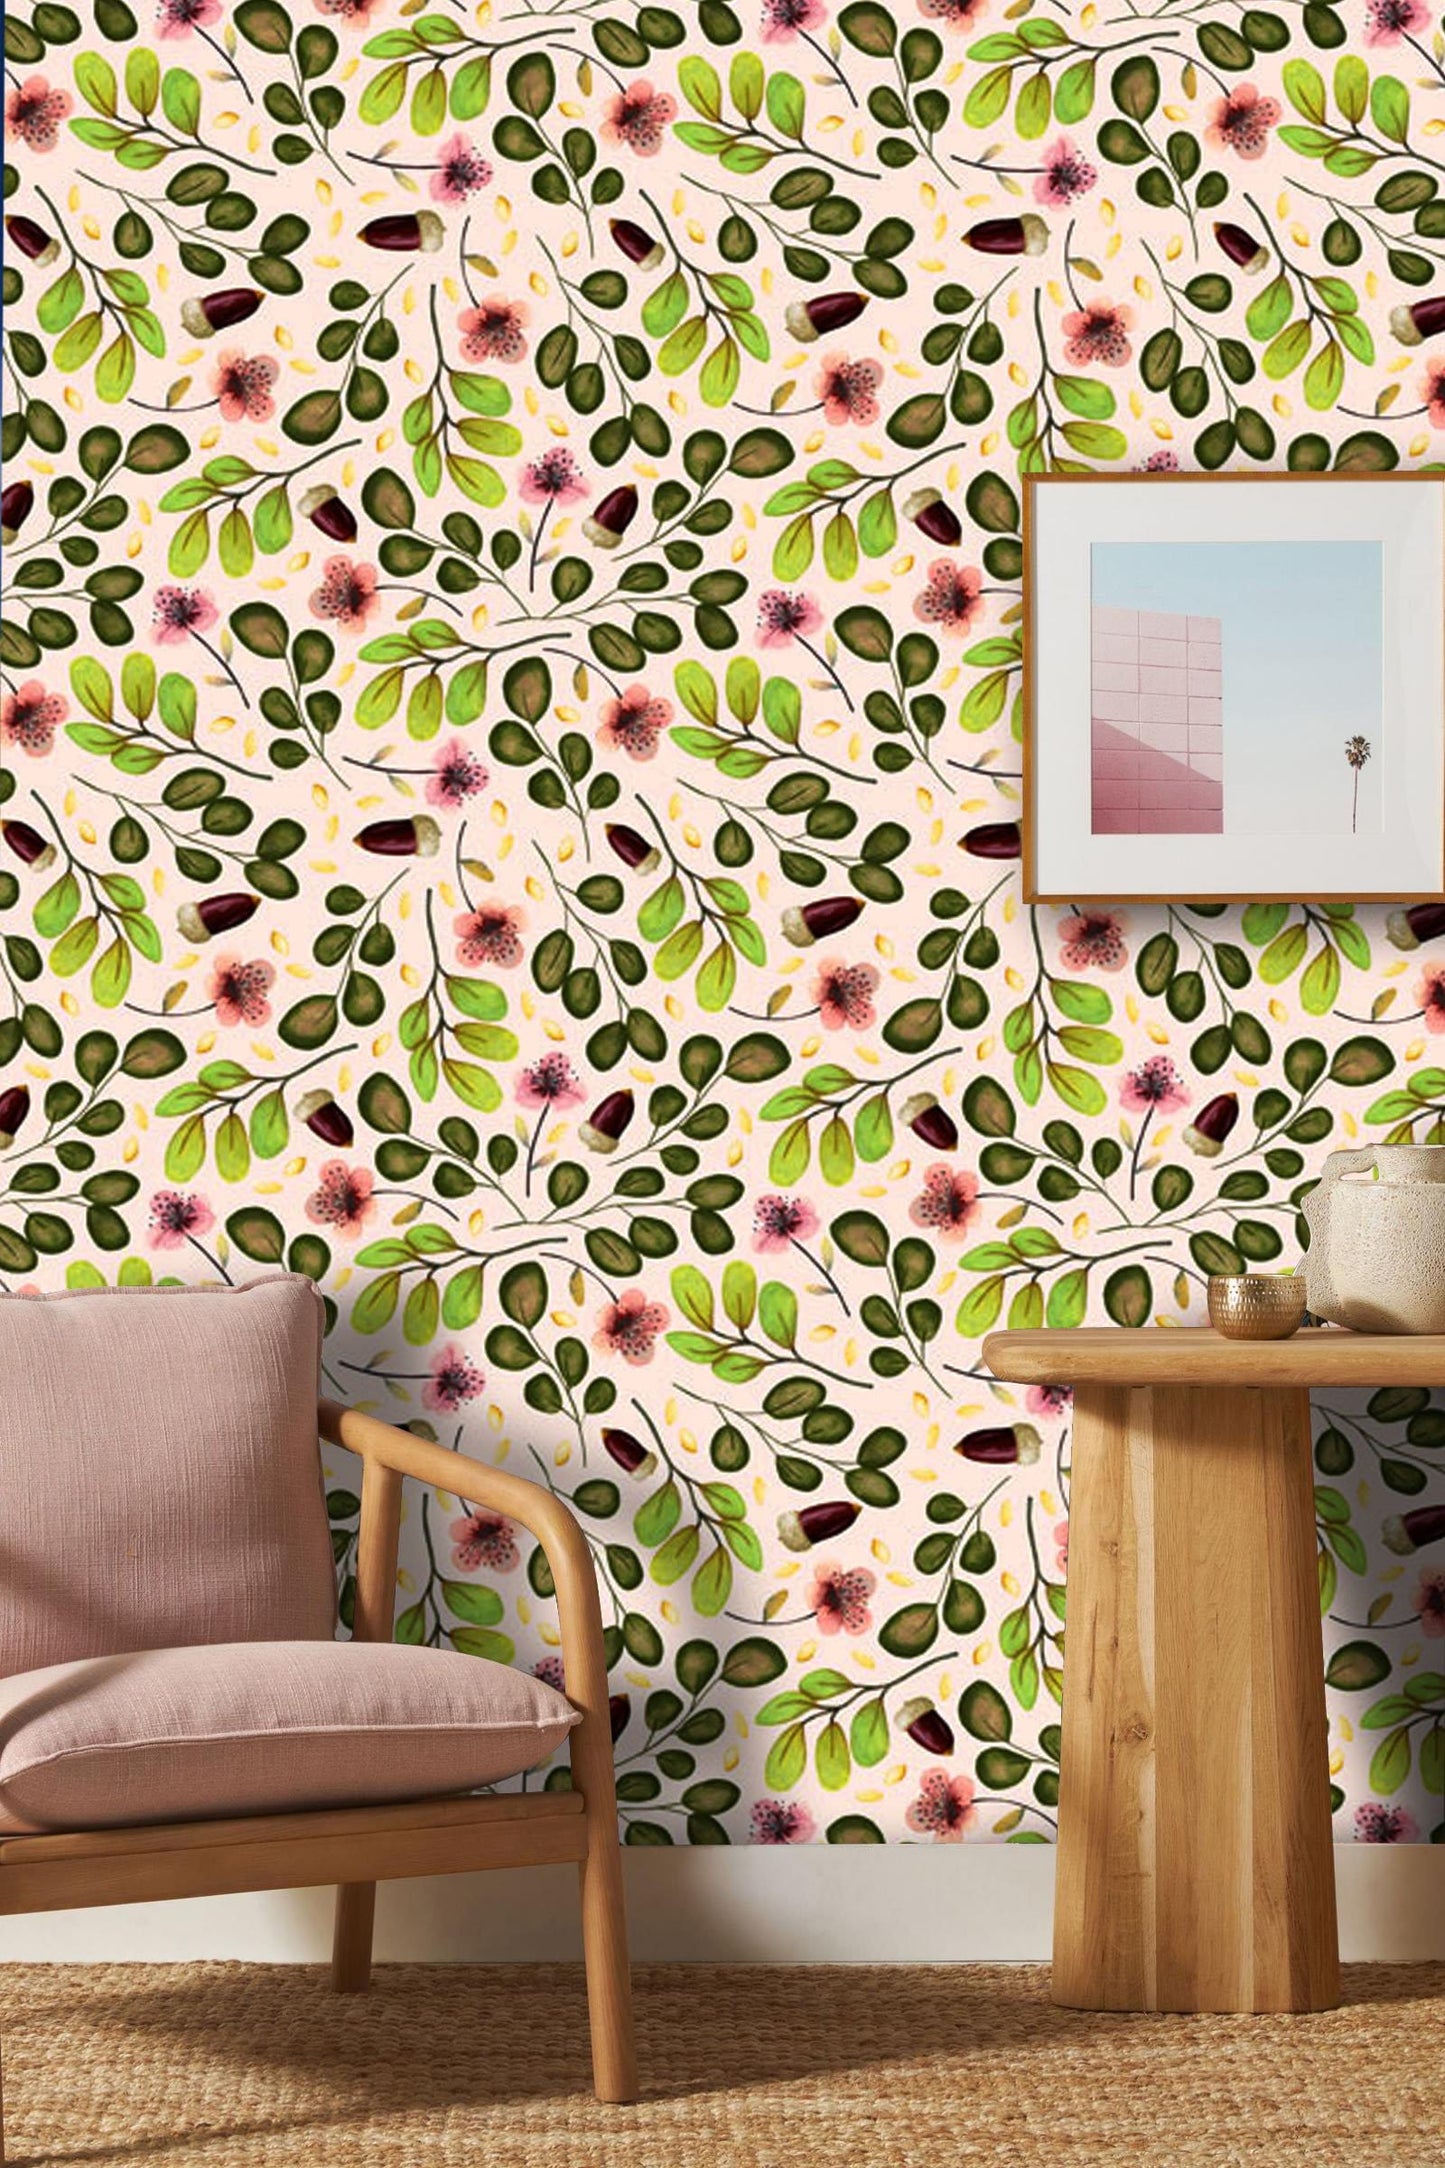 Wallpaper Mural for Living Room with Plants and Filberts